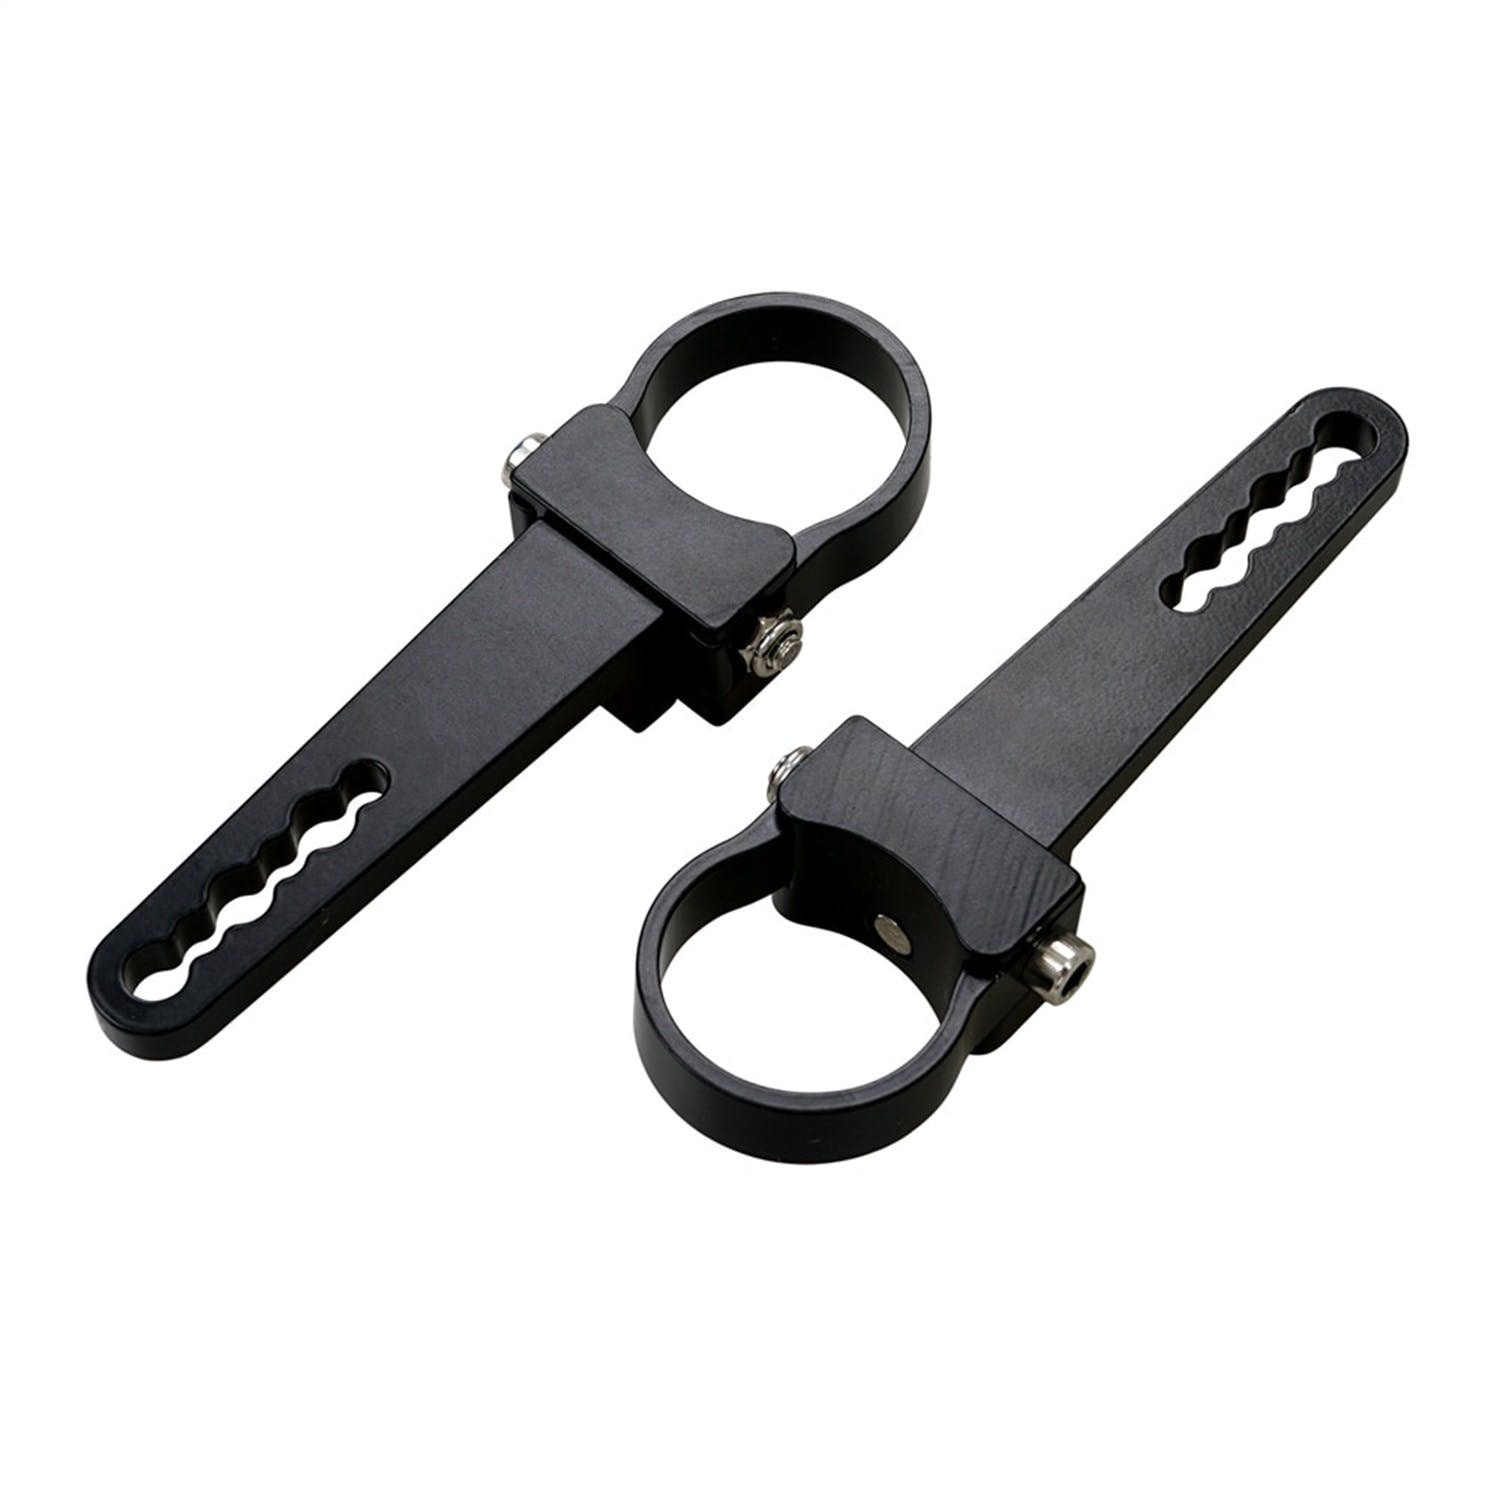 BrightSource 200175 Tube Mount Universal Fit 1.75in. w/360 degree rotation. Sold in pairs